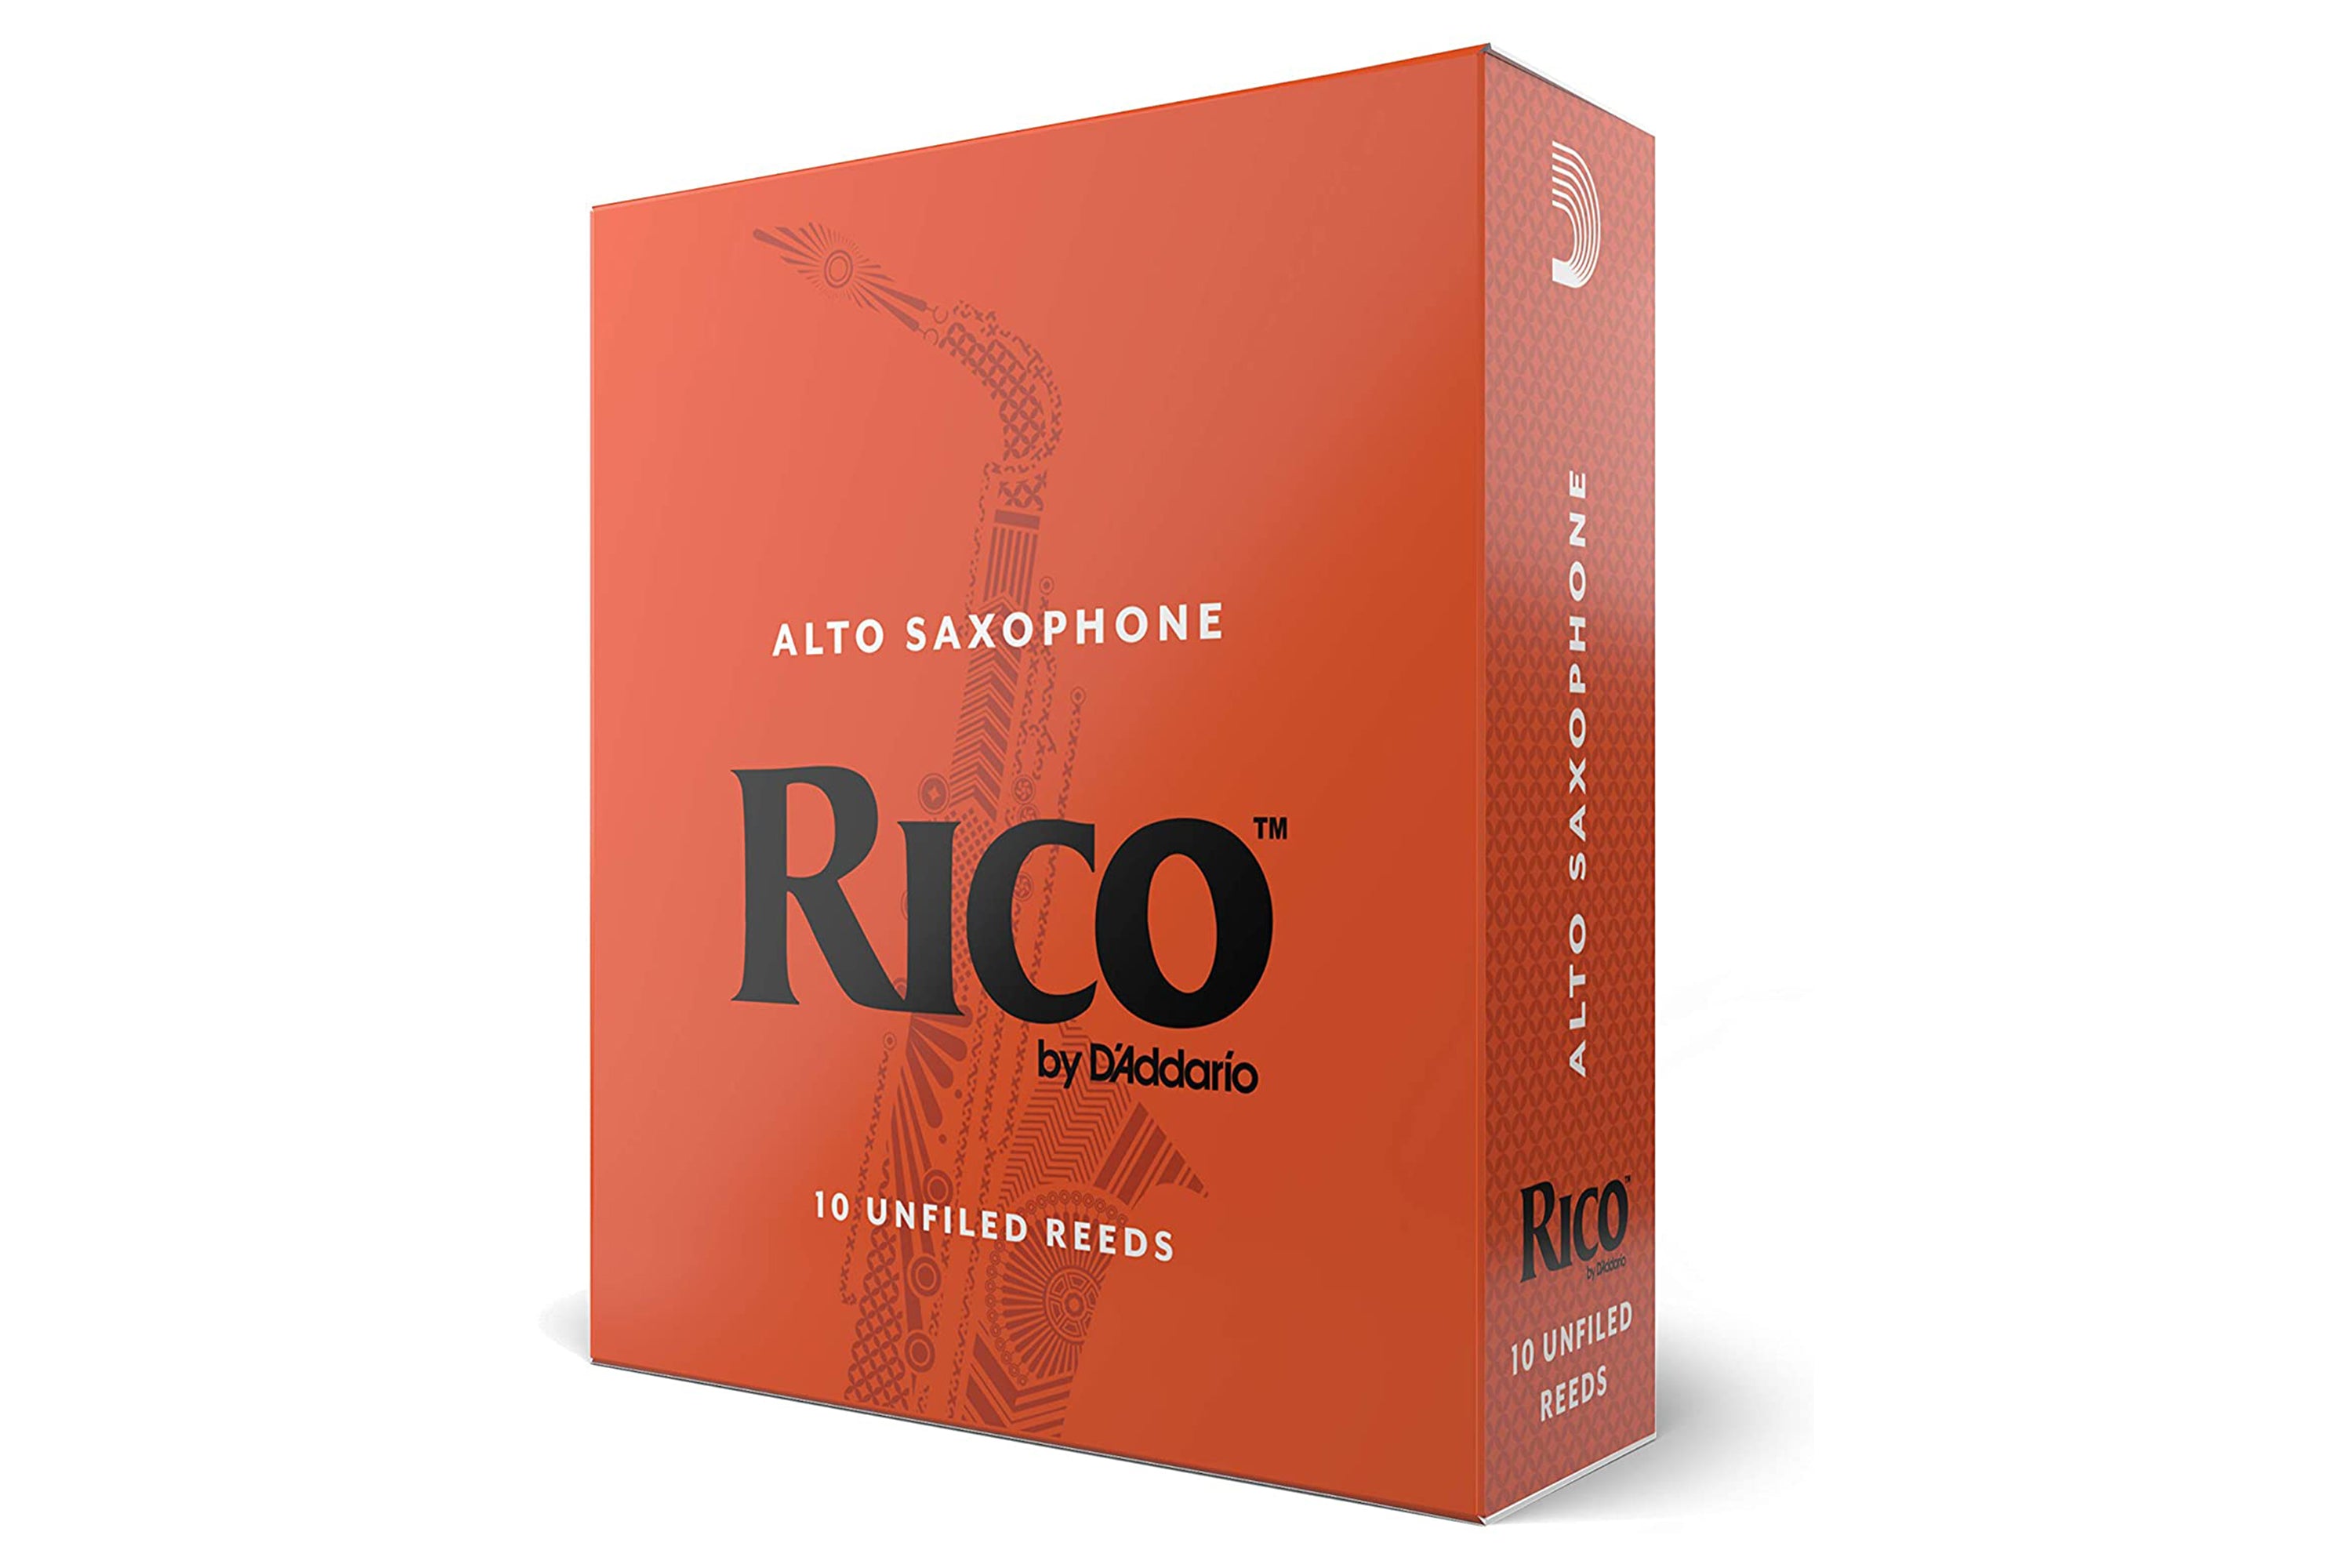 Rico by D'Addario Alto Saxophone Reeds Strength 3.0 - 10 Pack